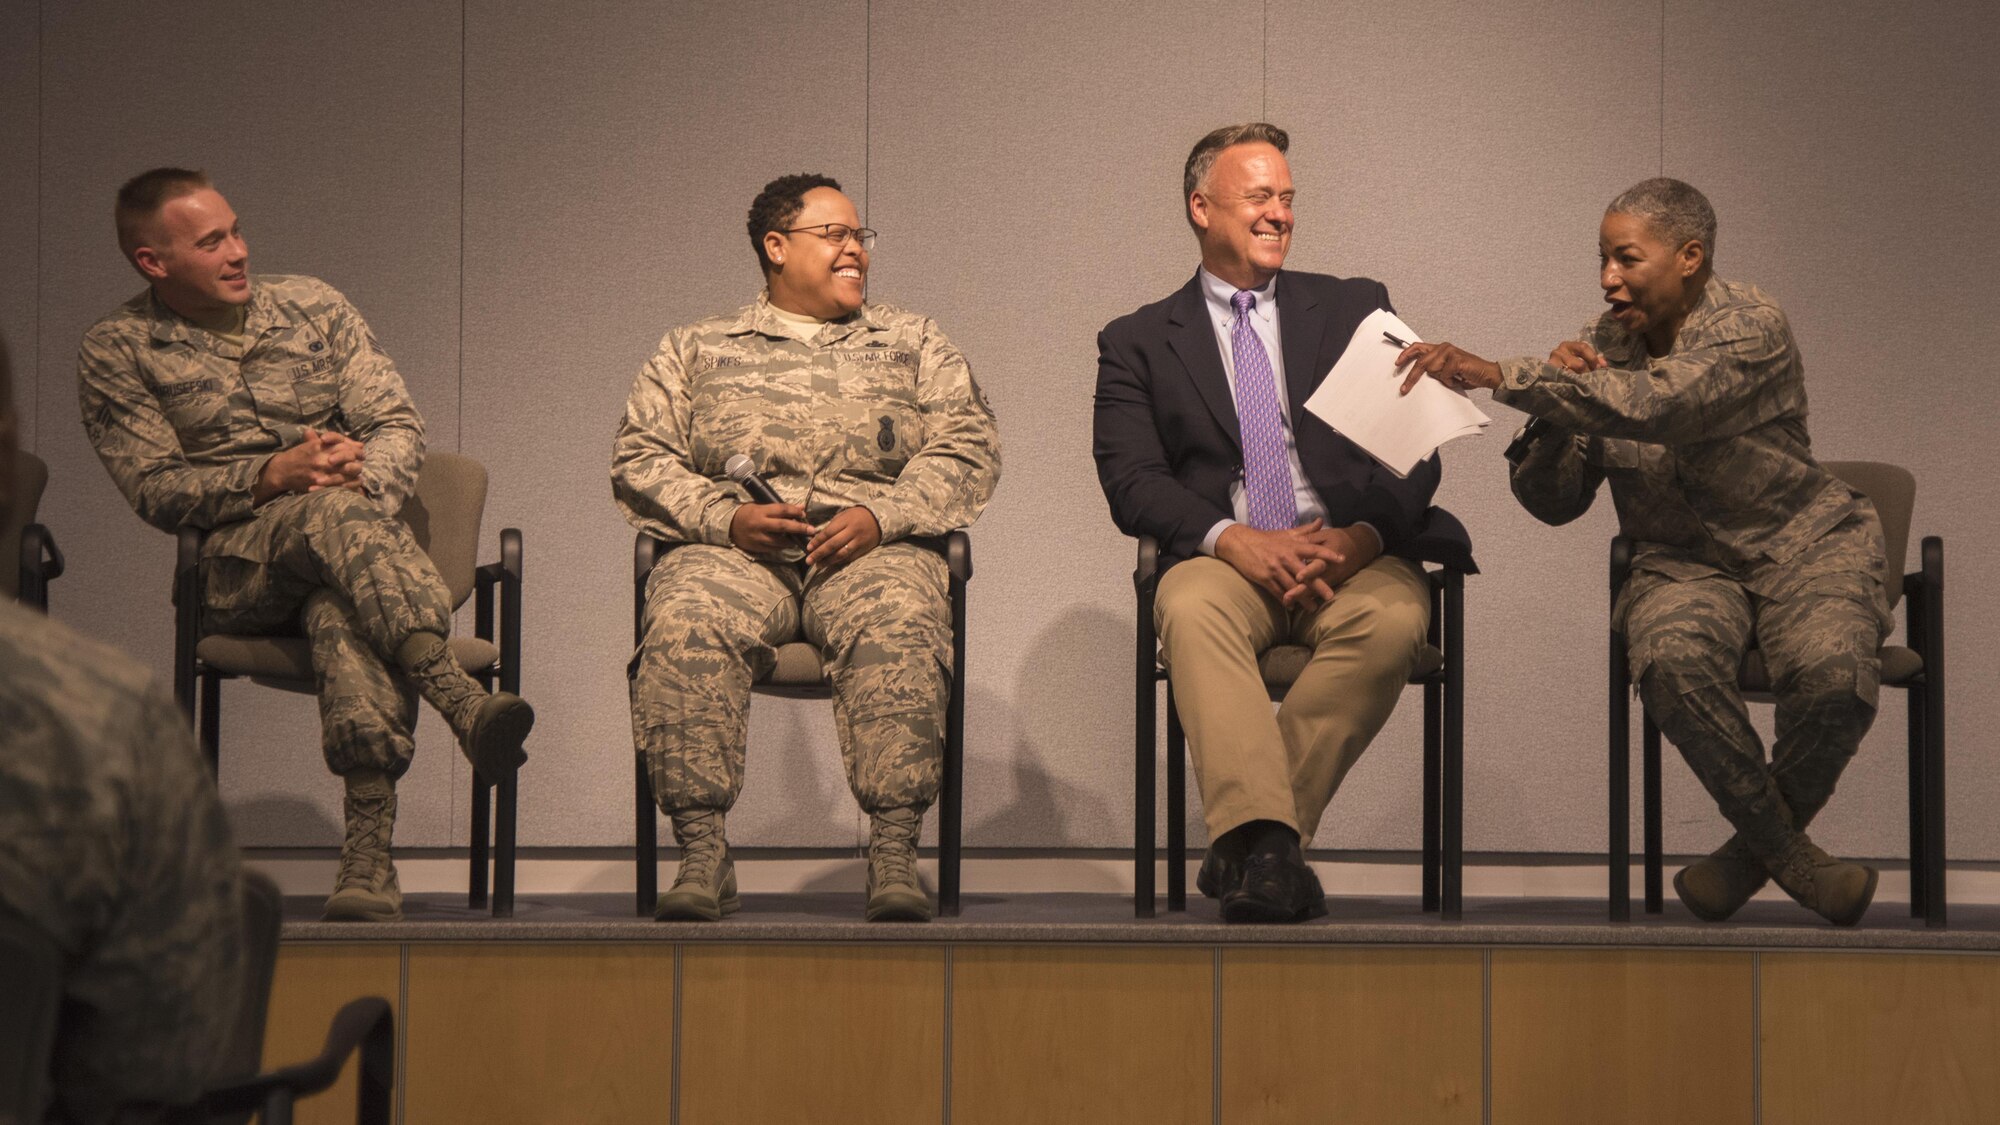 Four service members talk about their experience of being gay in the military during a Lesbian, Gay, Bisexual and Transgender Pride Month special observance panel discussion at Joint Base Andrews, Md., June 29, 2017. The LGBT Month observance goal was to educate the community and encourage a supportive, safe and respectful work environment for all service members, regardless of sexual orientation or gender identity. (U.S. Air Force photo by Airman 1st Class Valentina Lopez)